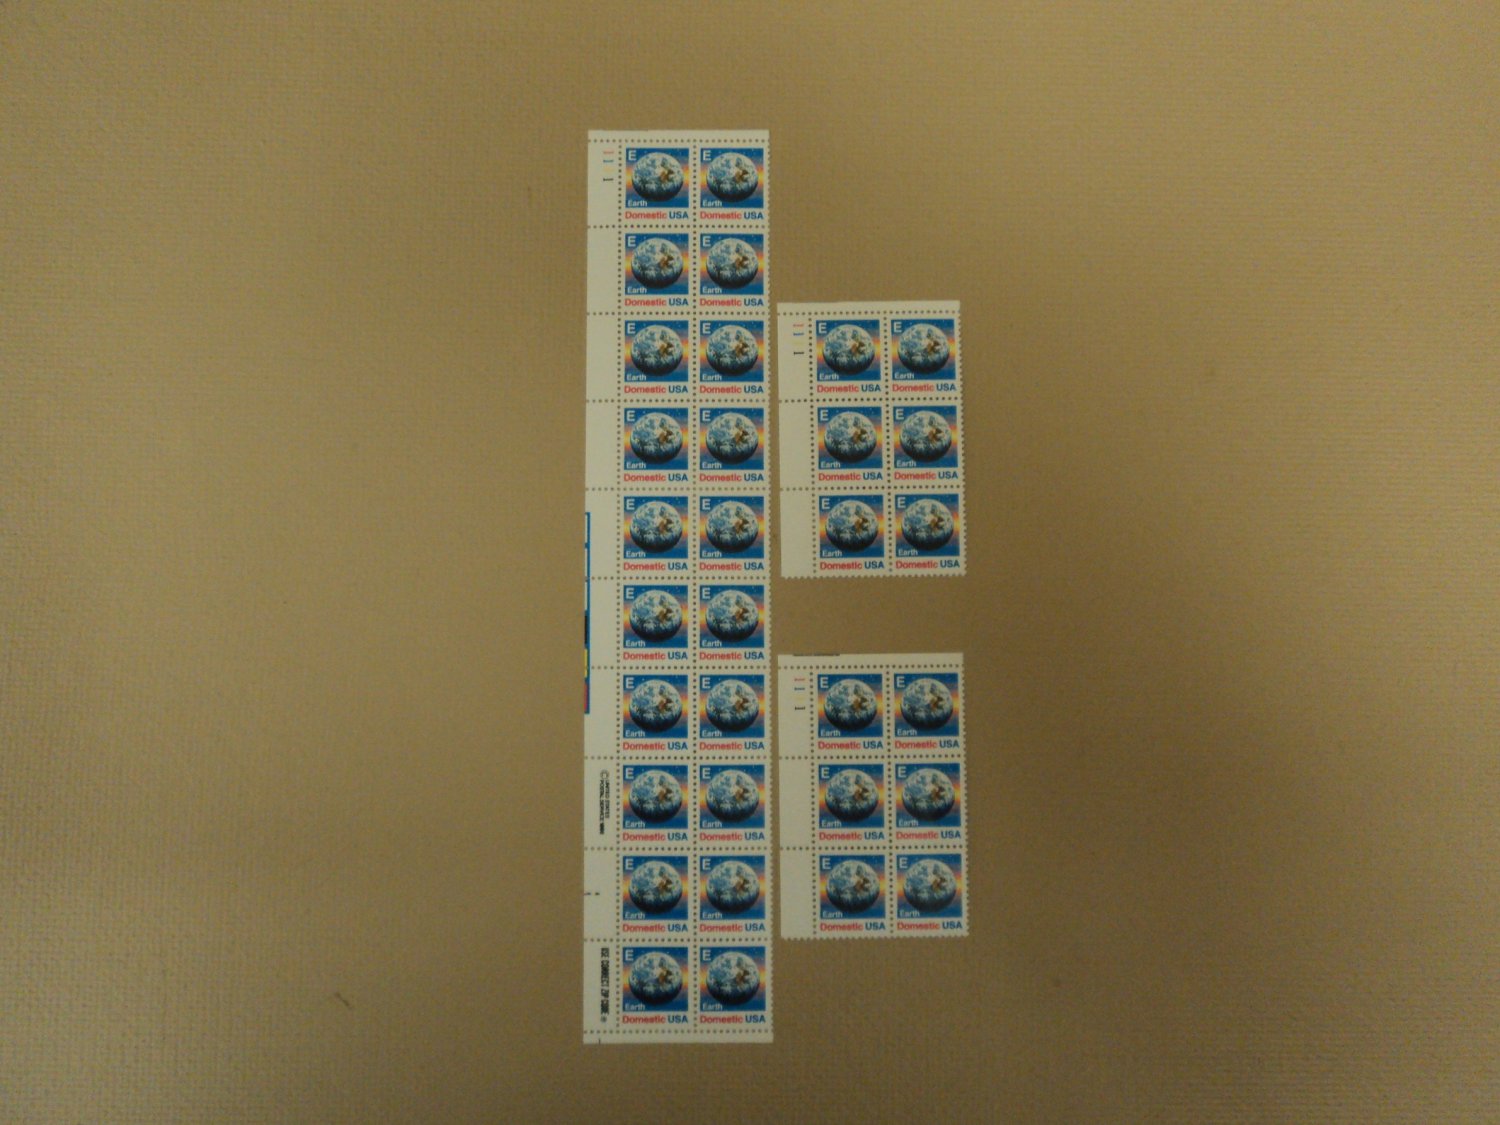 USPS Scott 2277 E 1986 Earth Domestic Lot of 3 Plate Block 32 Stamps ...